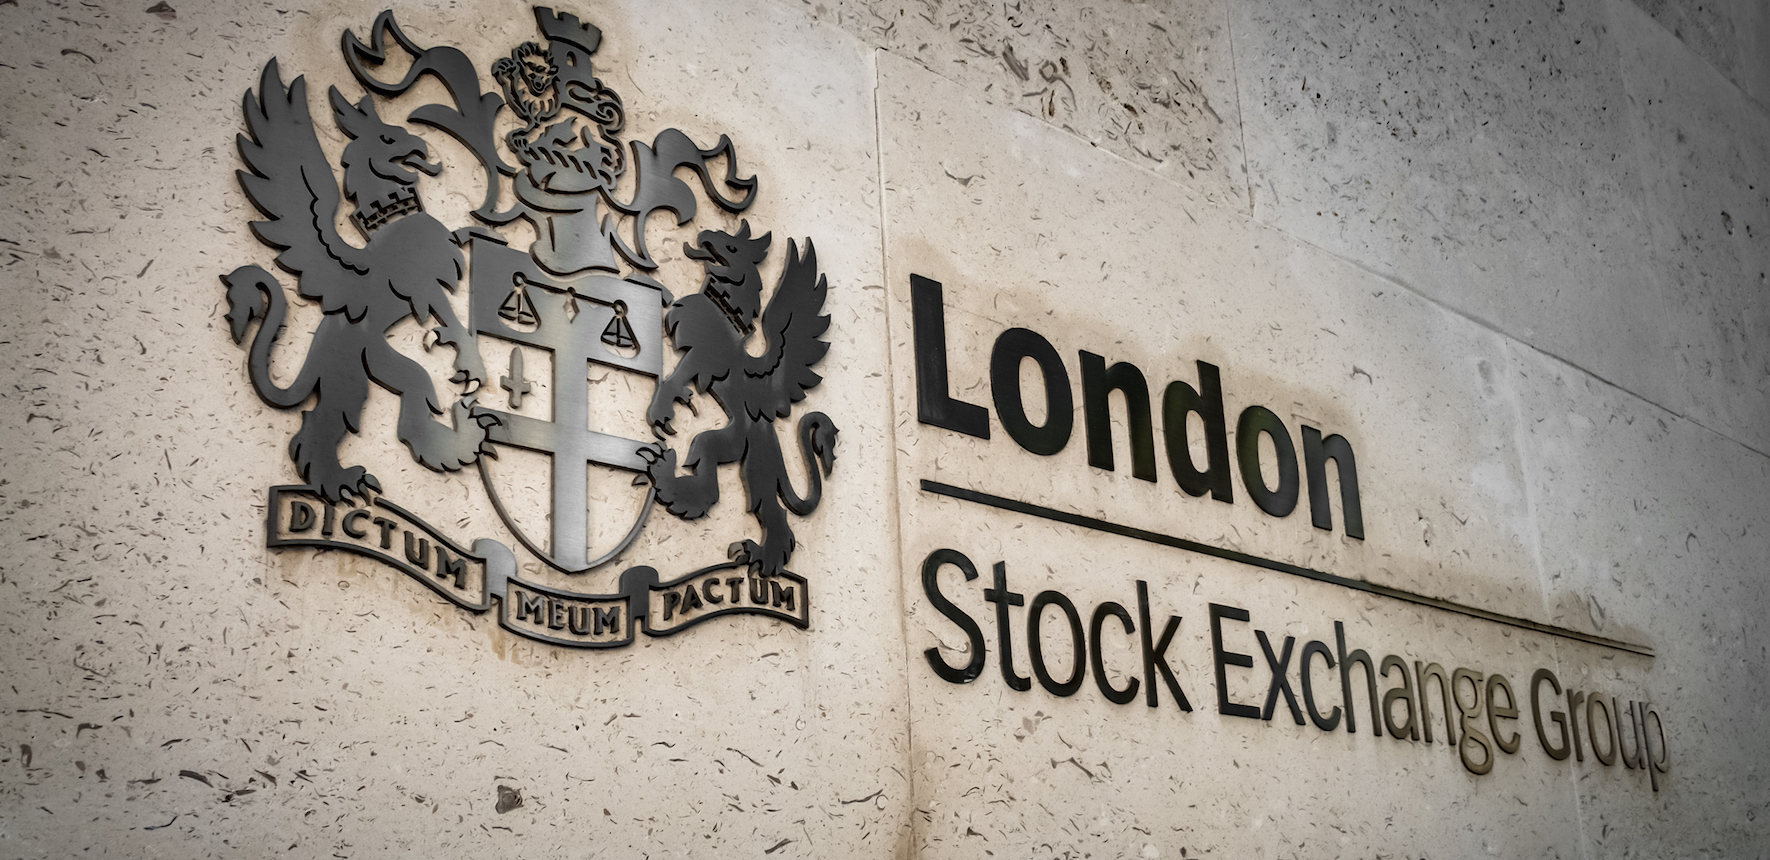 london stock exchange guided tour